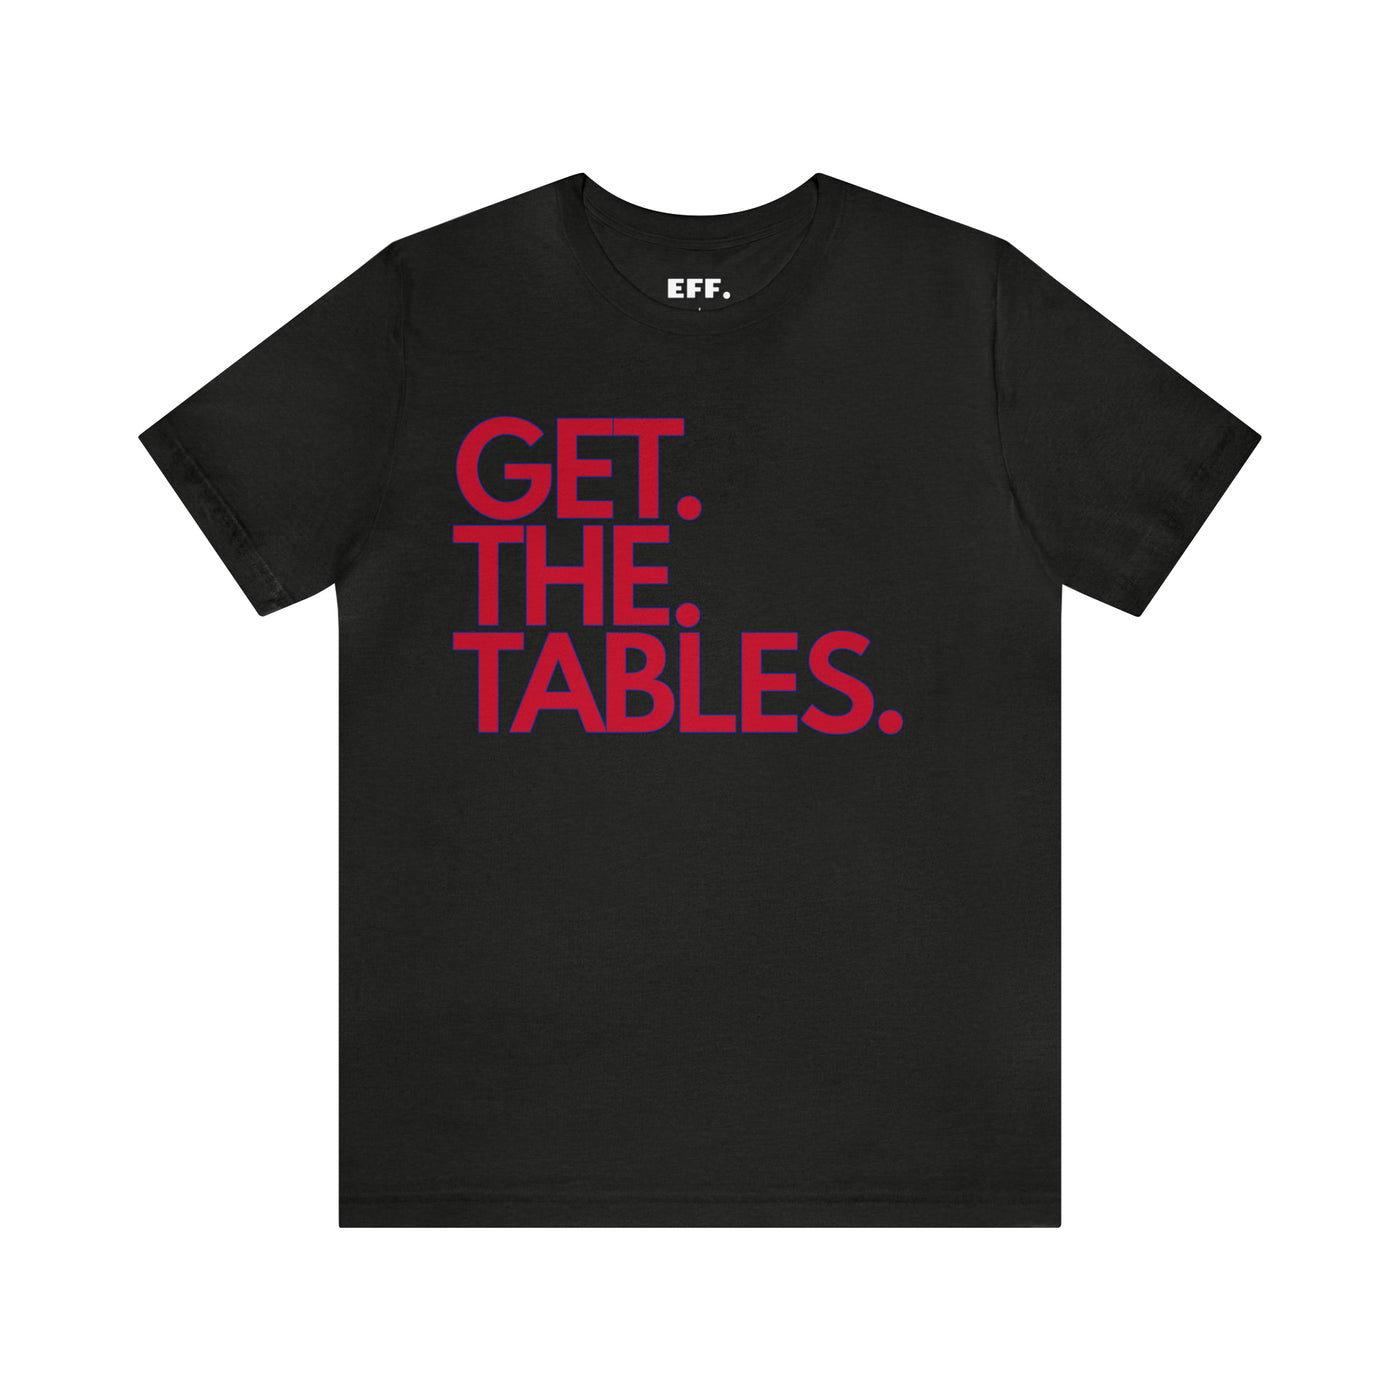 Get. The. Tables.